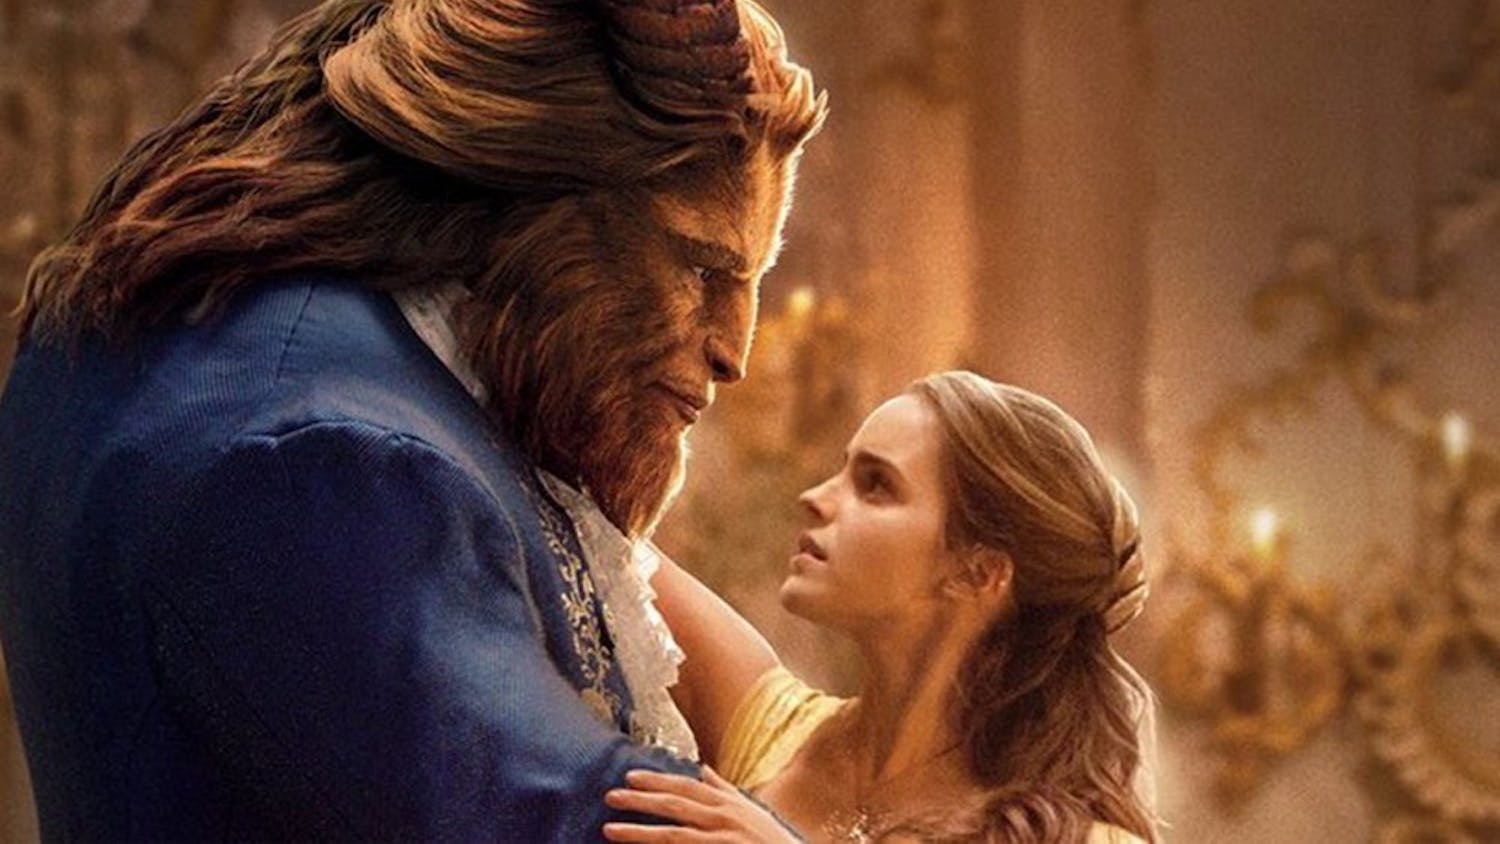 MOMS-CSM-MOVIE-REVIEW-BEAUTY-BEAST-2-MCT